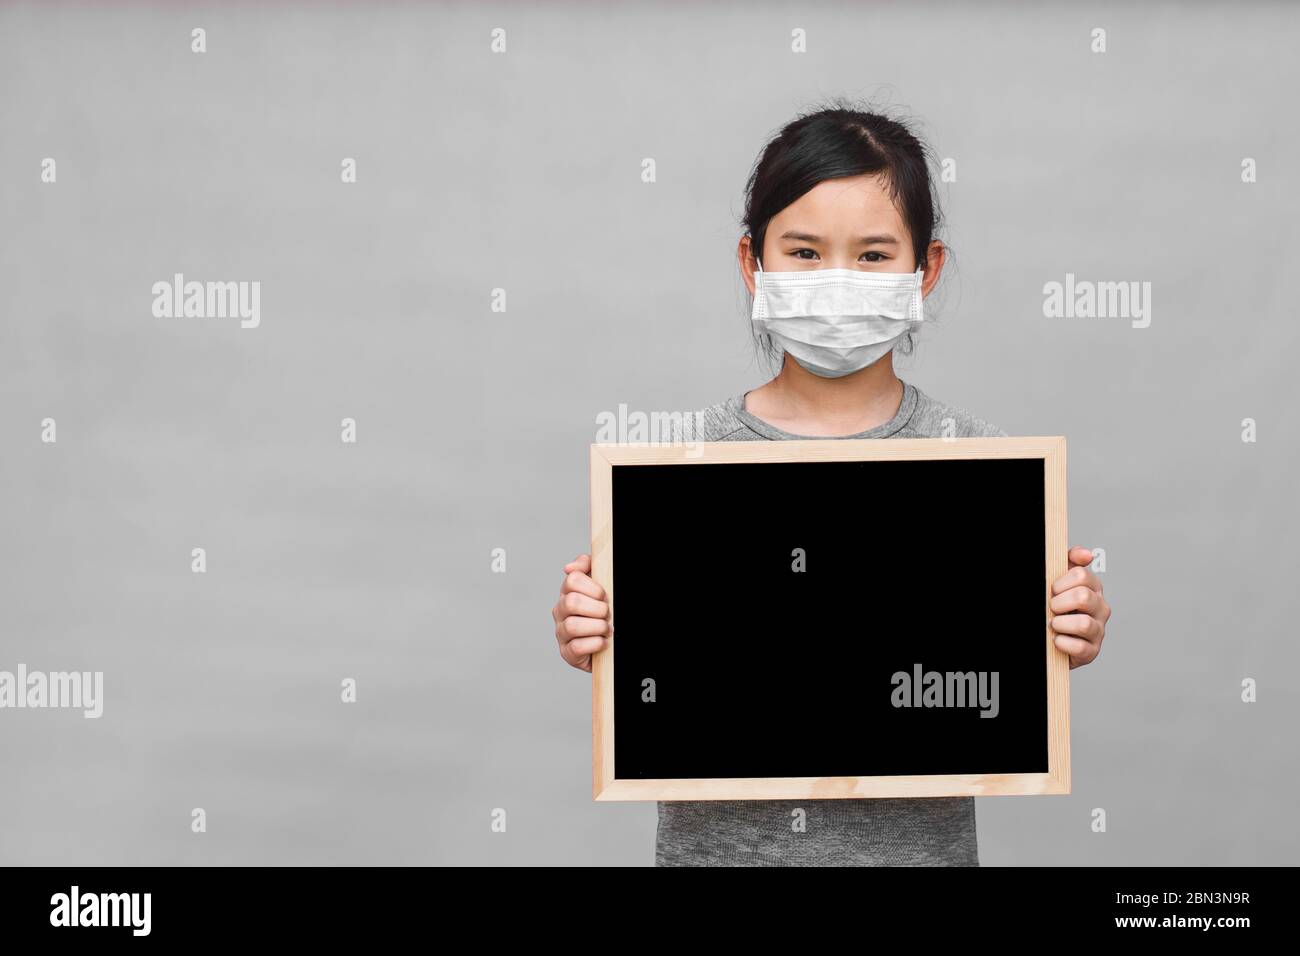 Little asian girl in a protective medical mask holding blackboard isolated on gray background. Protect from Coronavirus or Covid-19 epidemic. Stock Photo